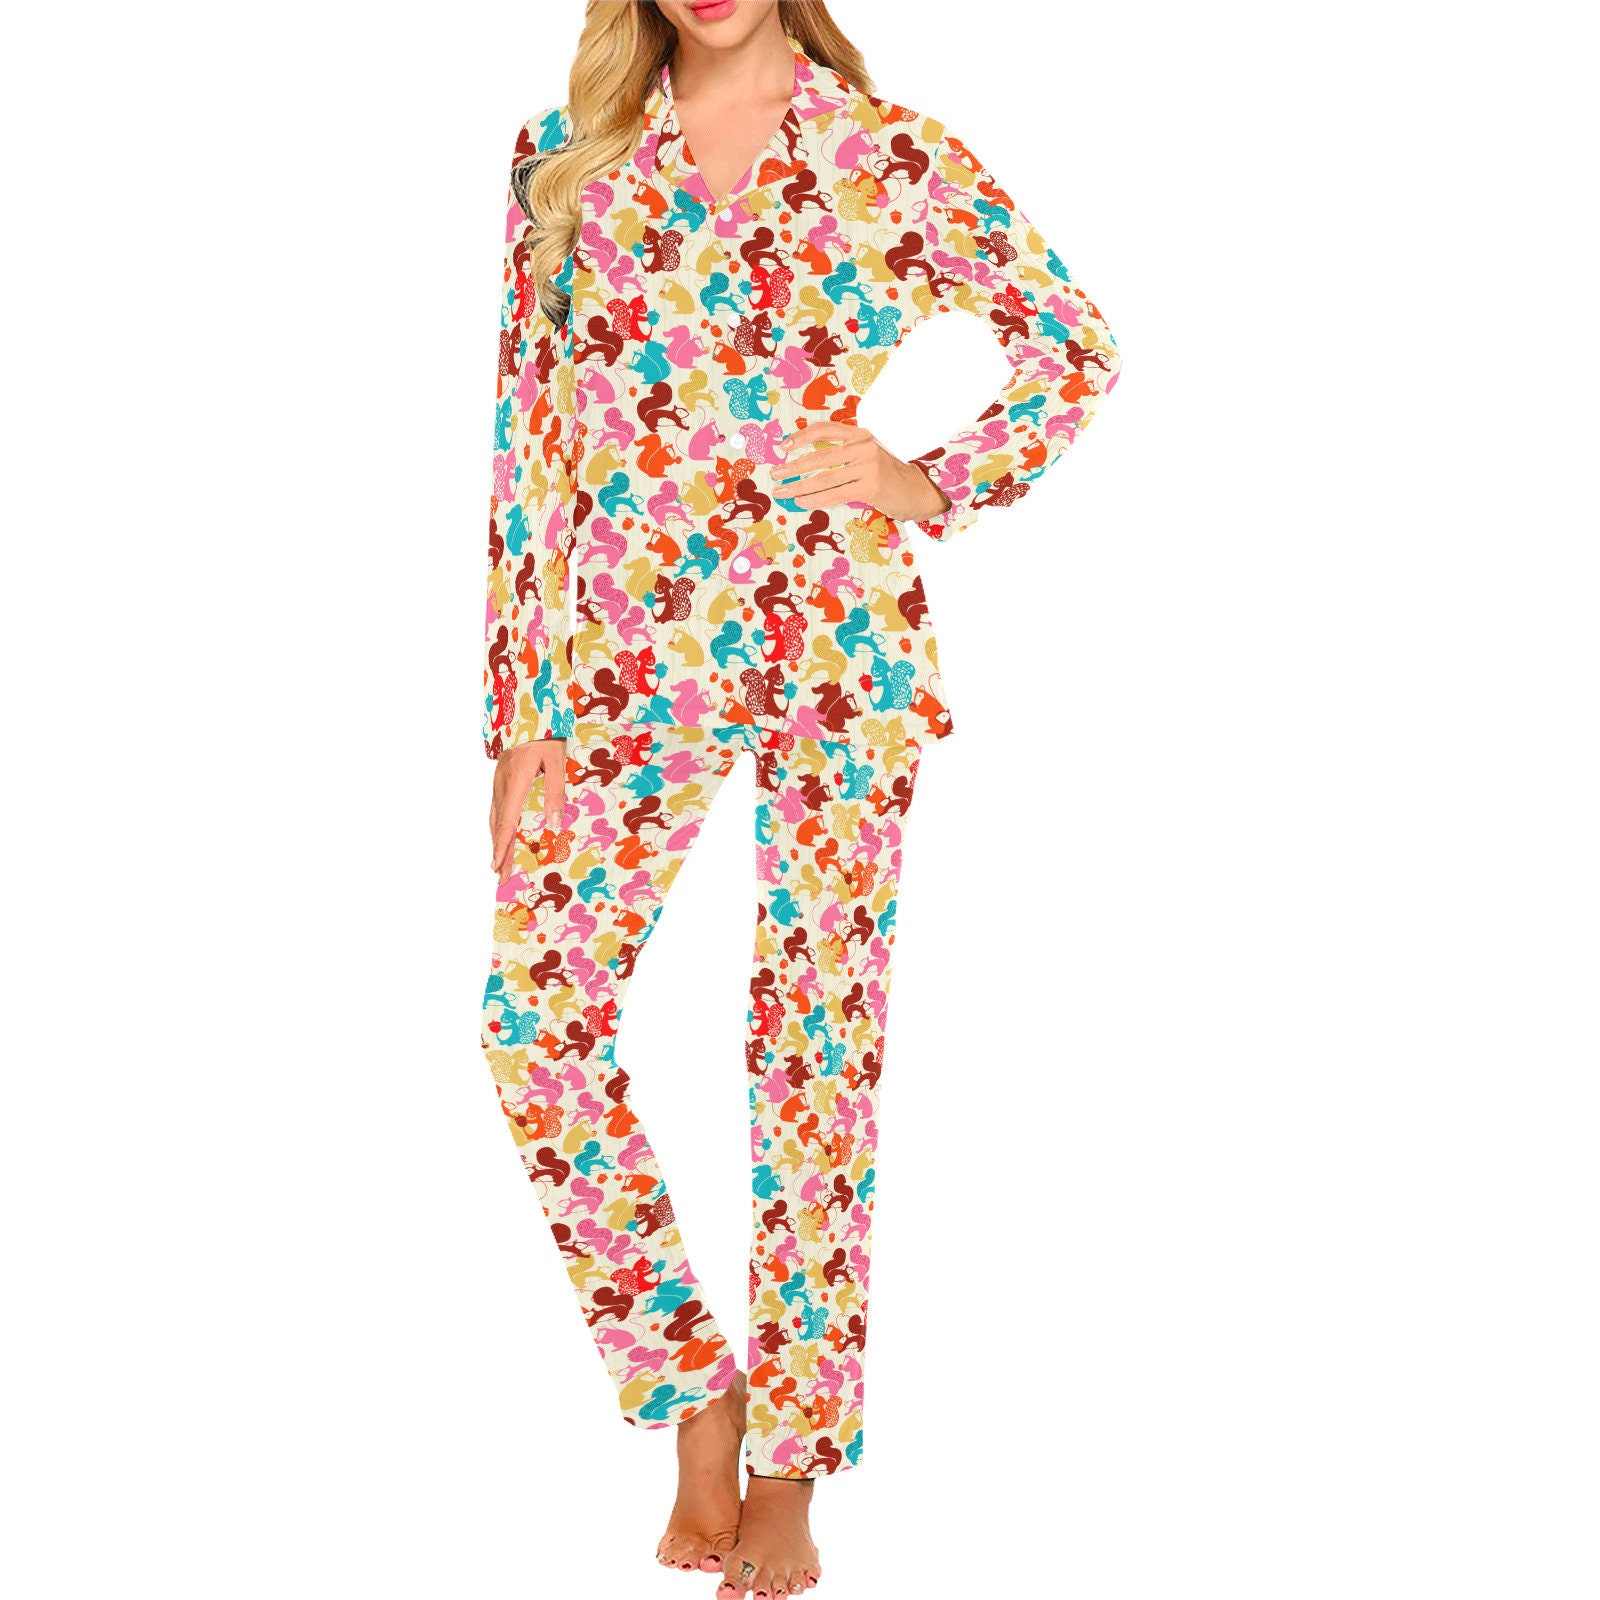 Taylor We Are Never Ever Getting Back Together Women's Squirrel Print  Pajamas 